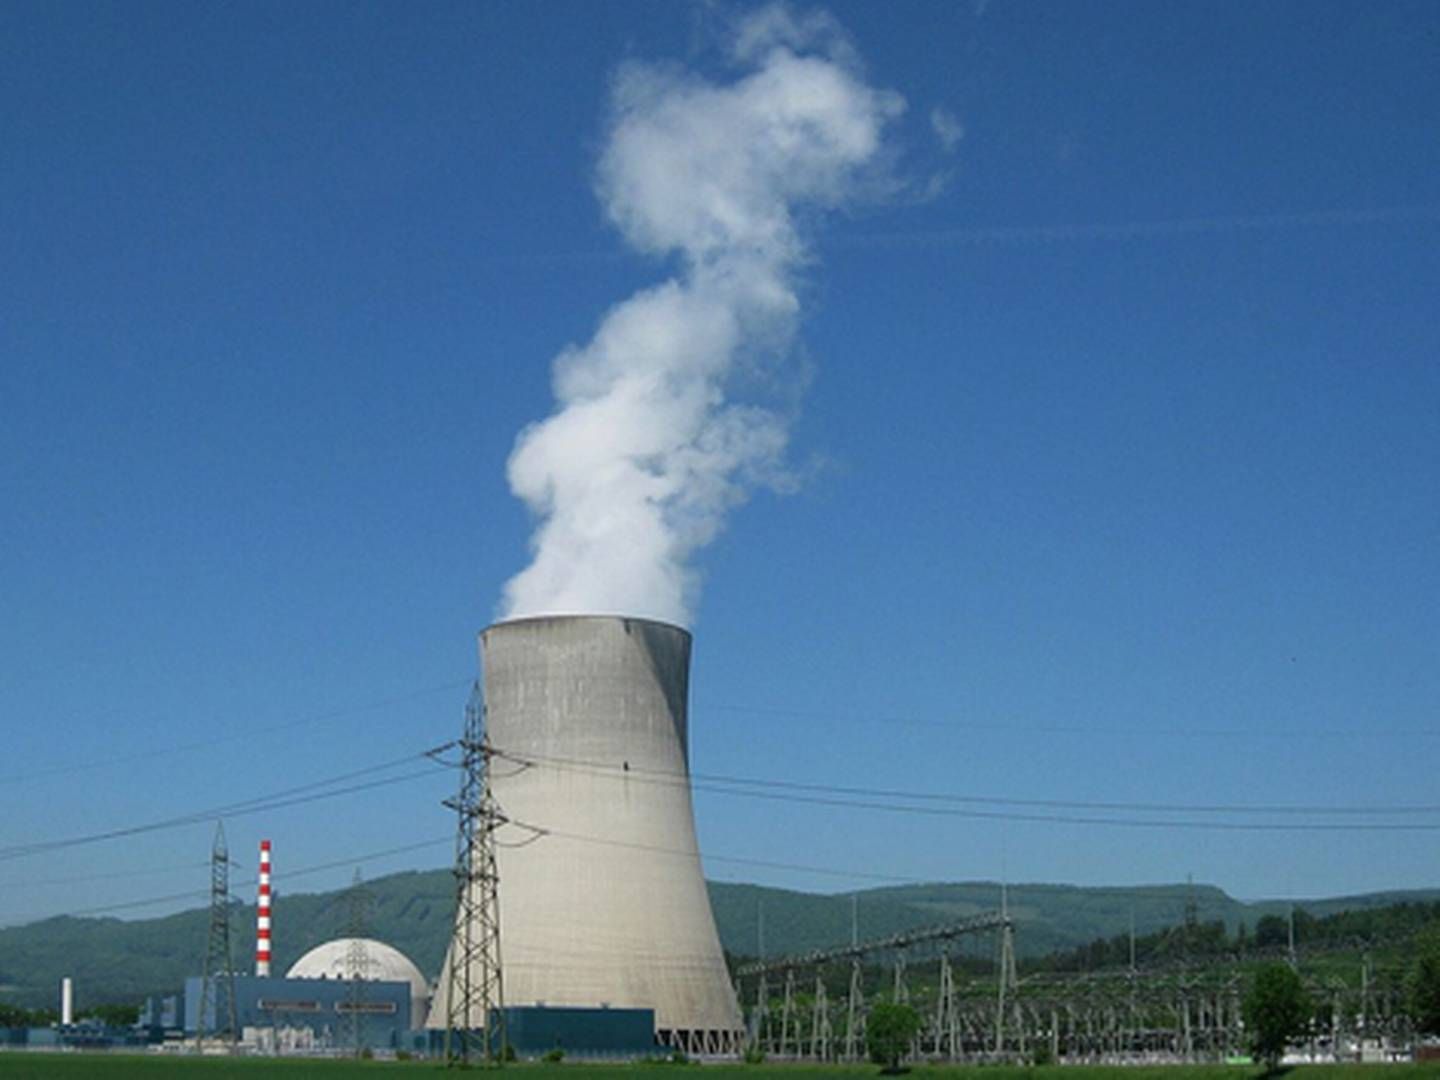 The largest Swiss nuclear power plant, Gösgen, will be shut down along with three of the country's other plants.